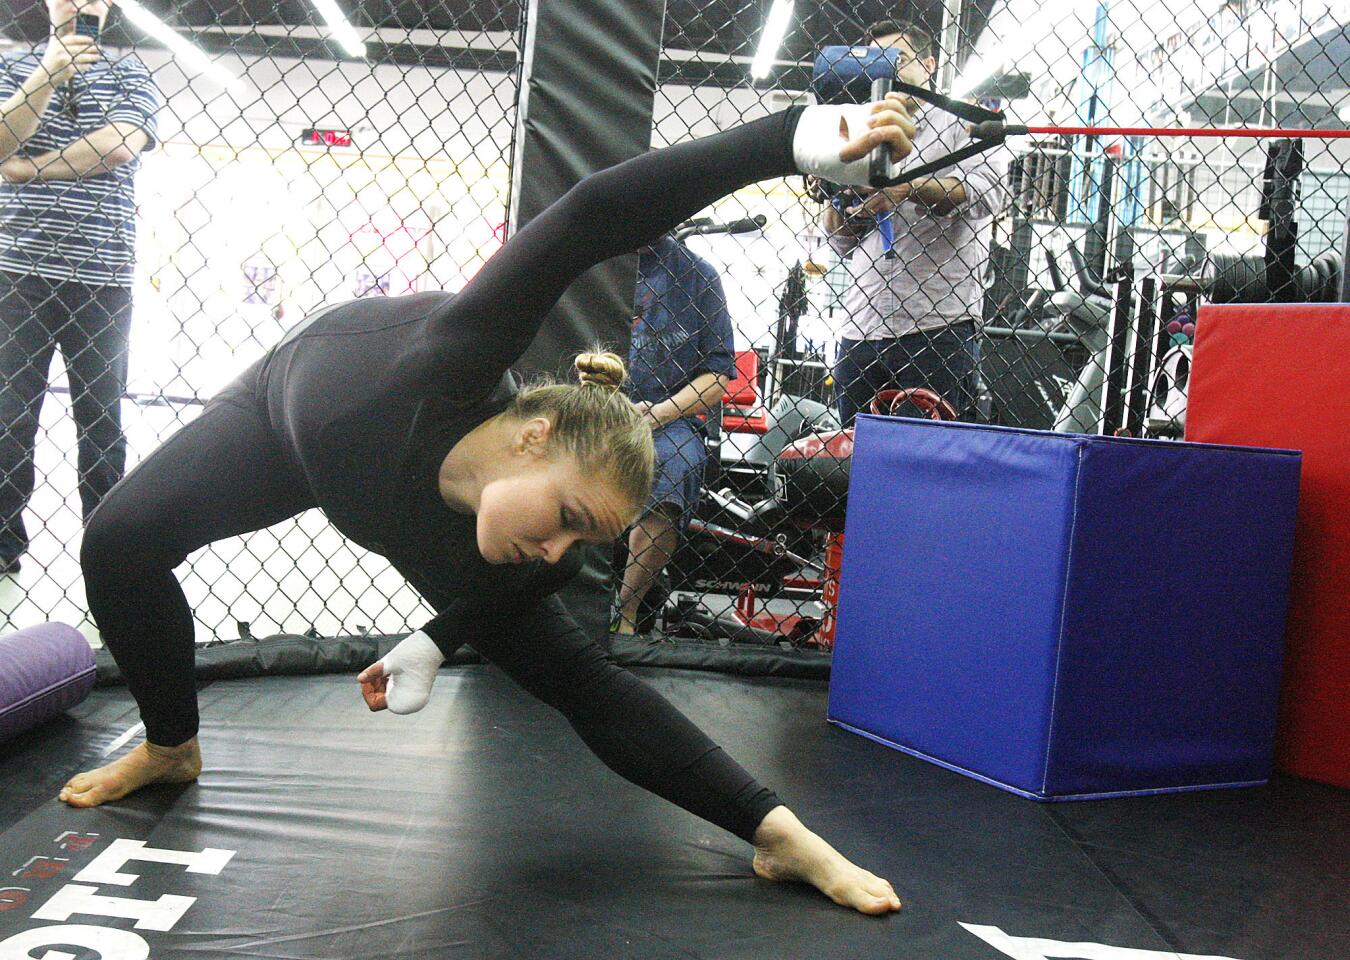 Ronda Rousey stretches with a bungee at an open workout with the MMA champion at the Glendale Fighting Club in Glendale on Monday, February 10, 2014. Several media photographers and reporters documented Rousey's every move as she gave interviews, warmed up, and sparred with her trainer Edmund Tarverdyan.